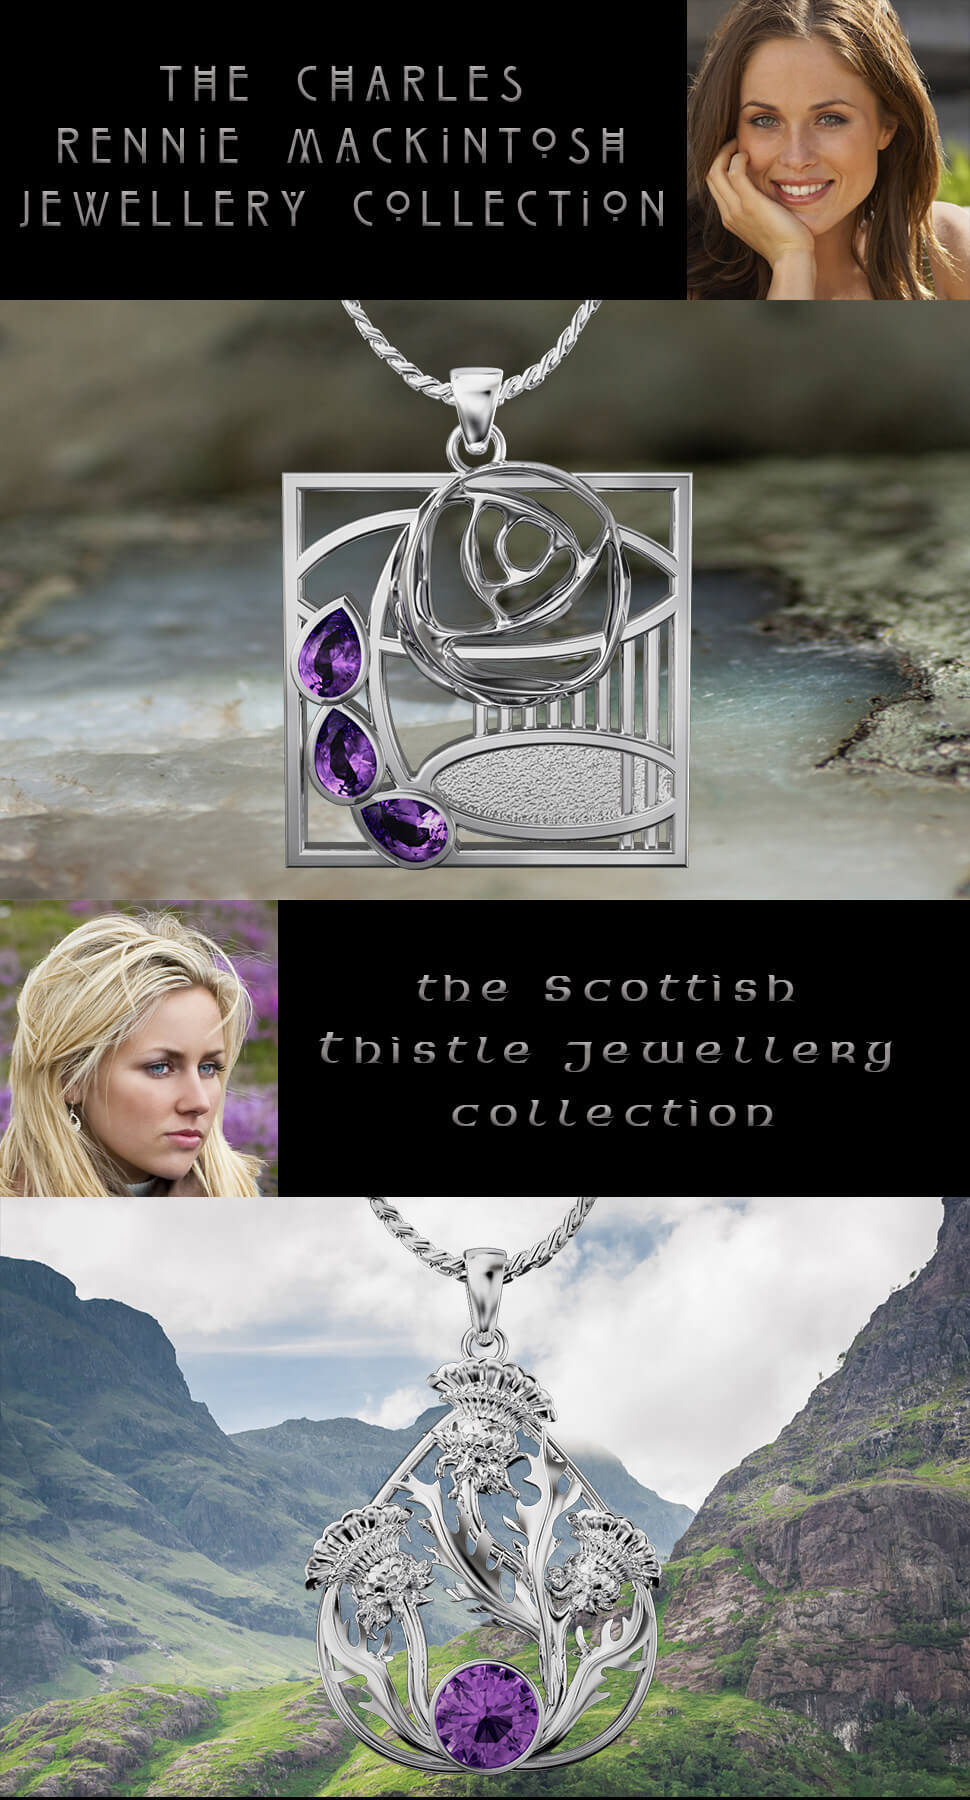 Our definitive Charles Rennie Mackintosh & Scottish Thistle jewellery collections. Sterling silver pendants, earrings, brooches, bracelets. Unique designs.